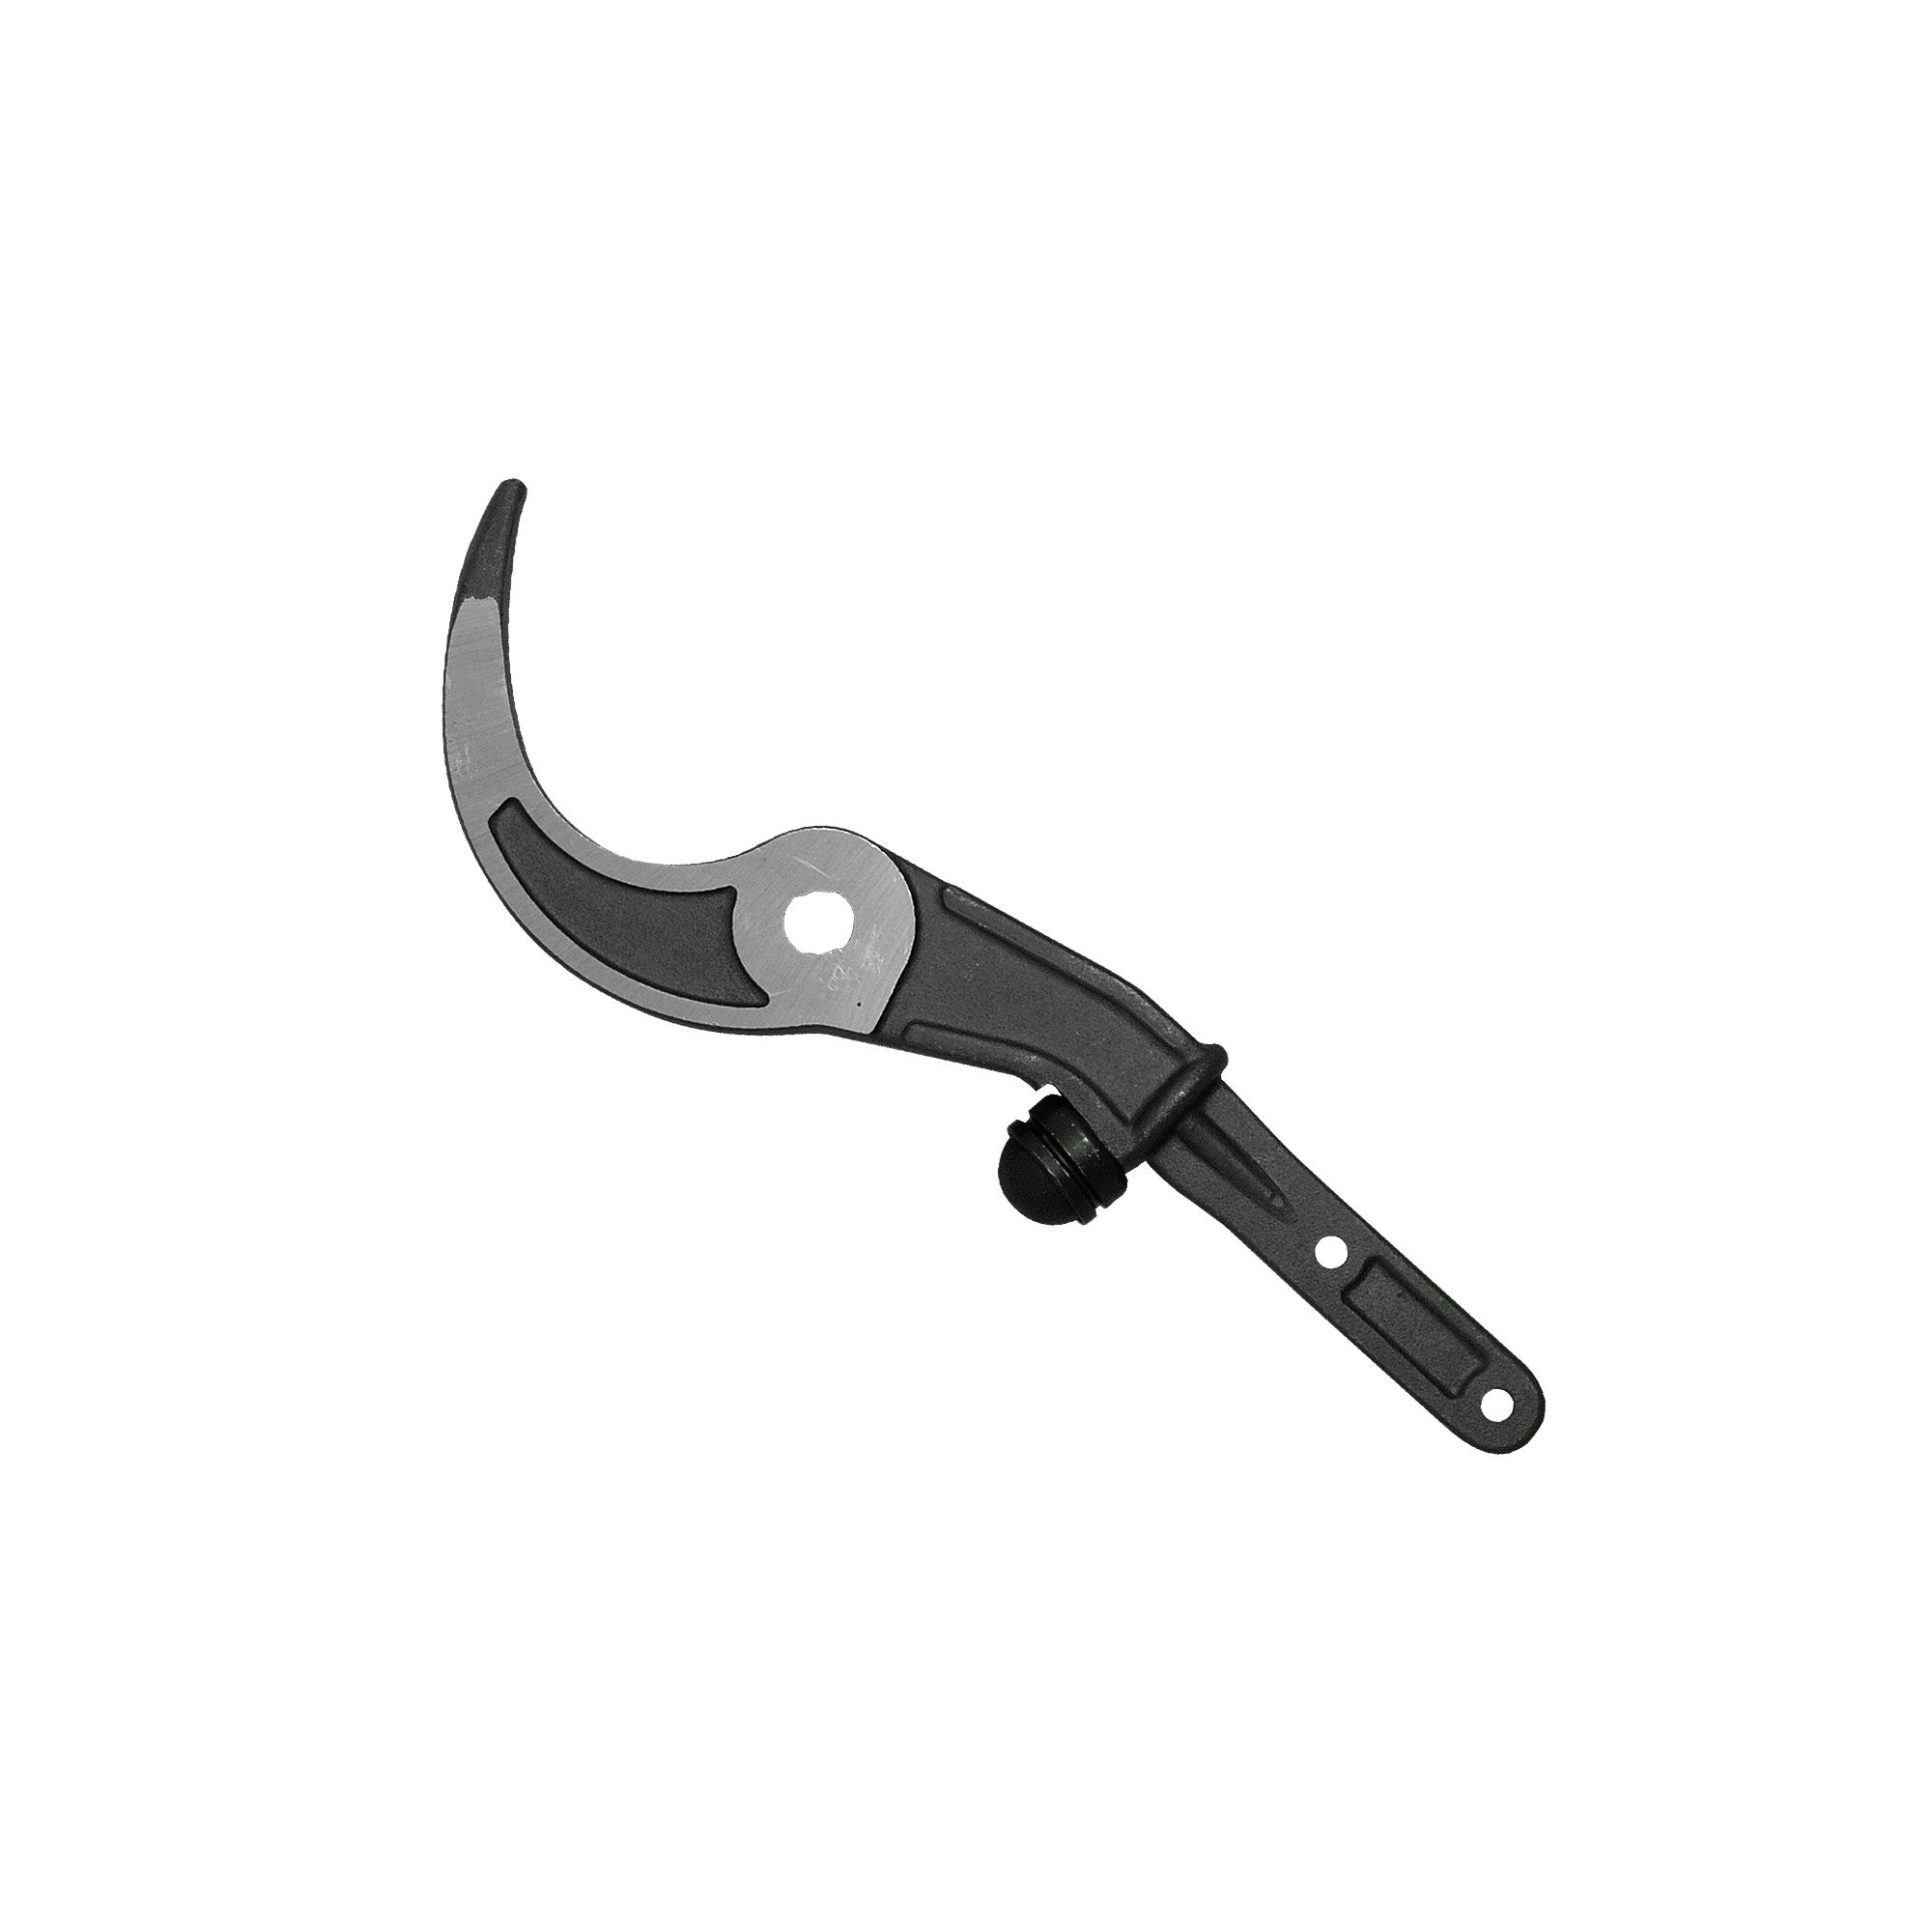 Replacement Hook for Orchard Loppers